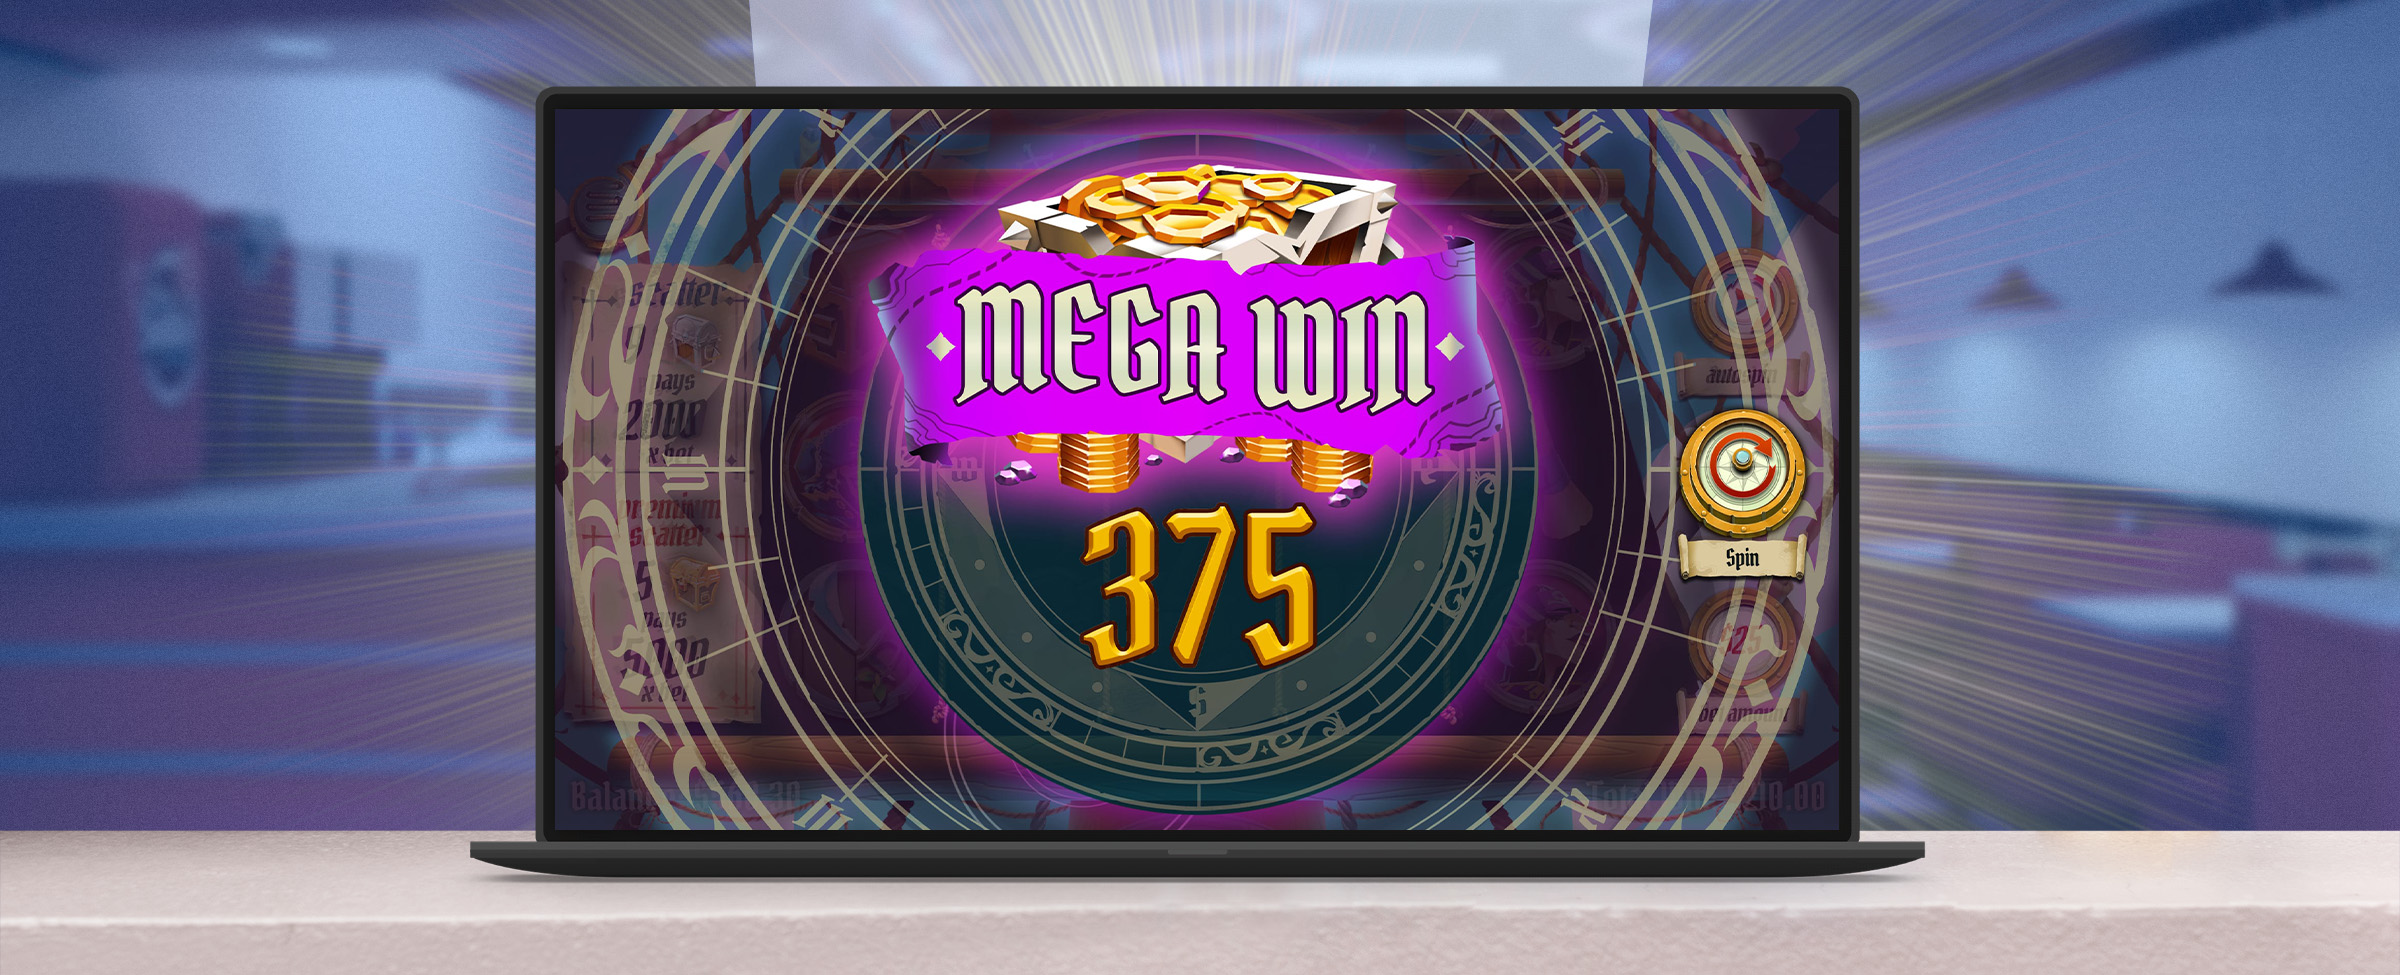 An open laptop sitting on a bench of an out-of-focus old diner, showing a screenshot from the Cafe Casino slot game Pirate’s Pick, with the words “mega win” and “375” beneath it.